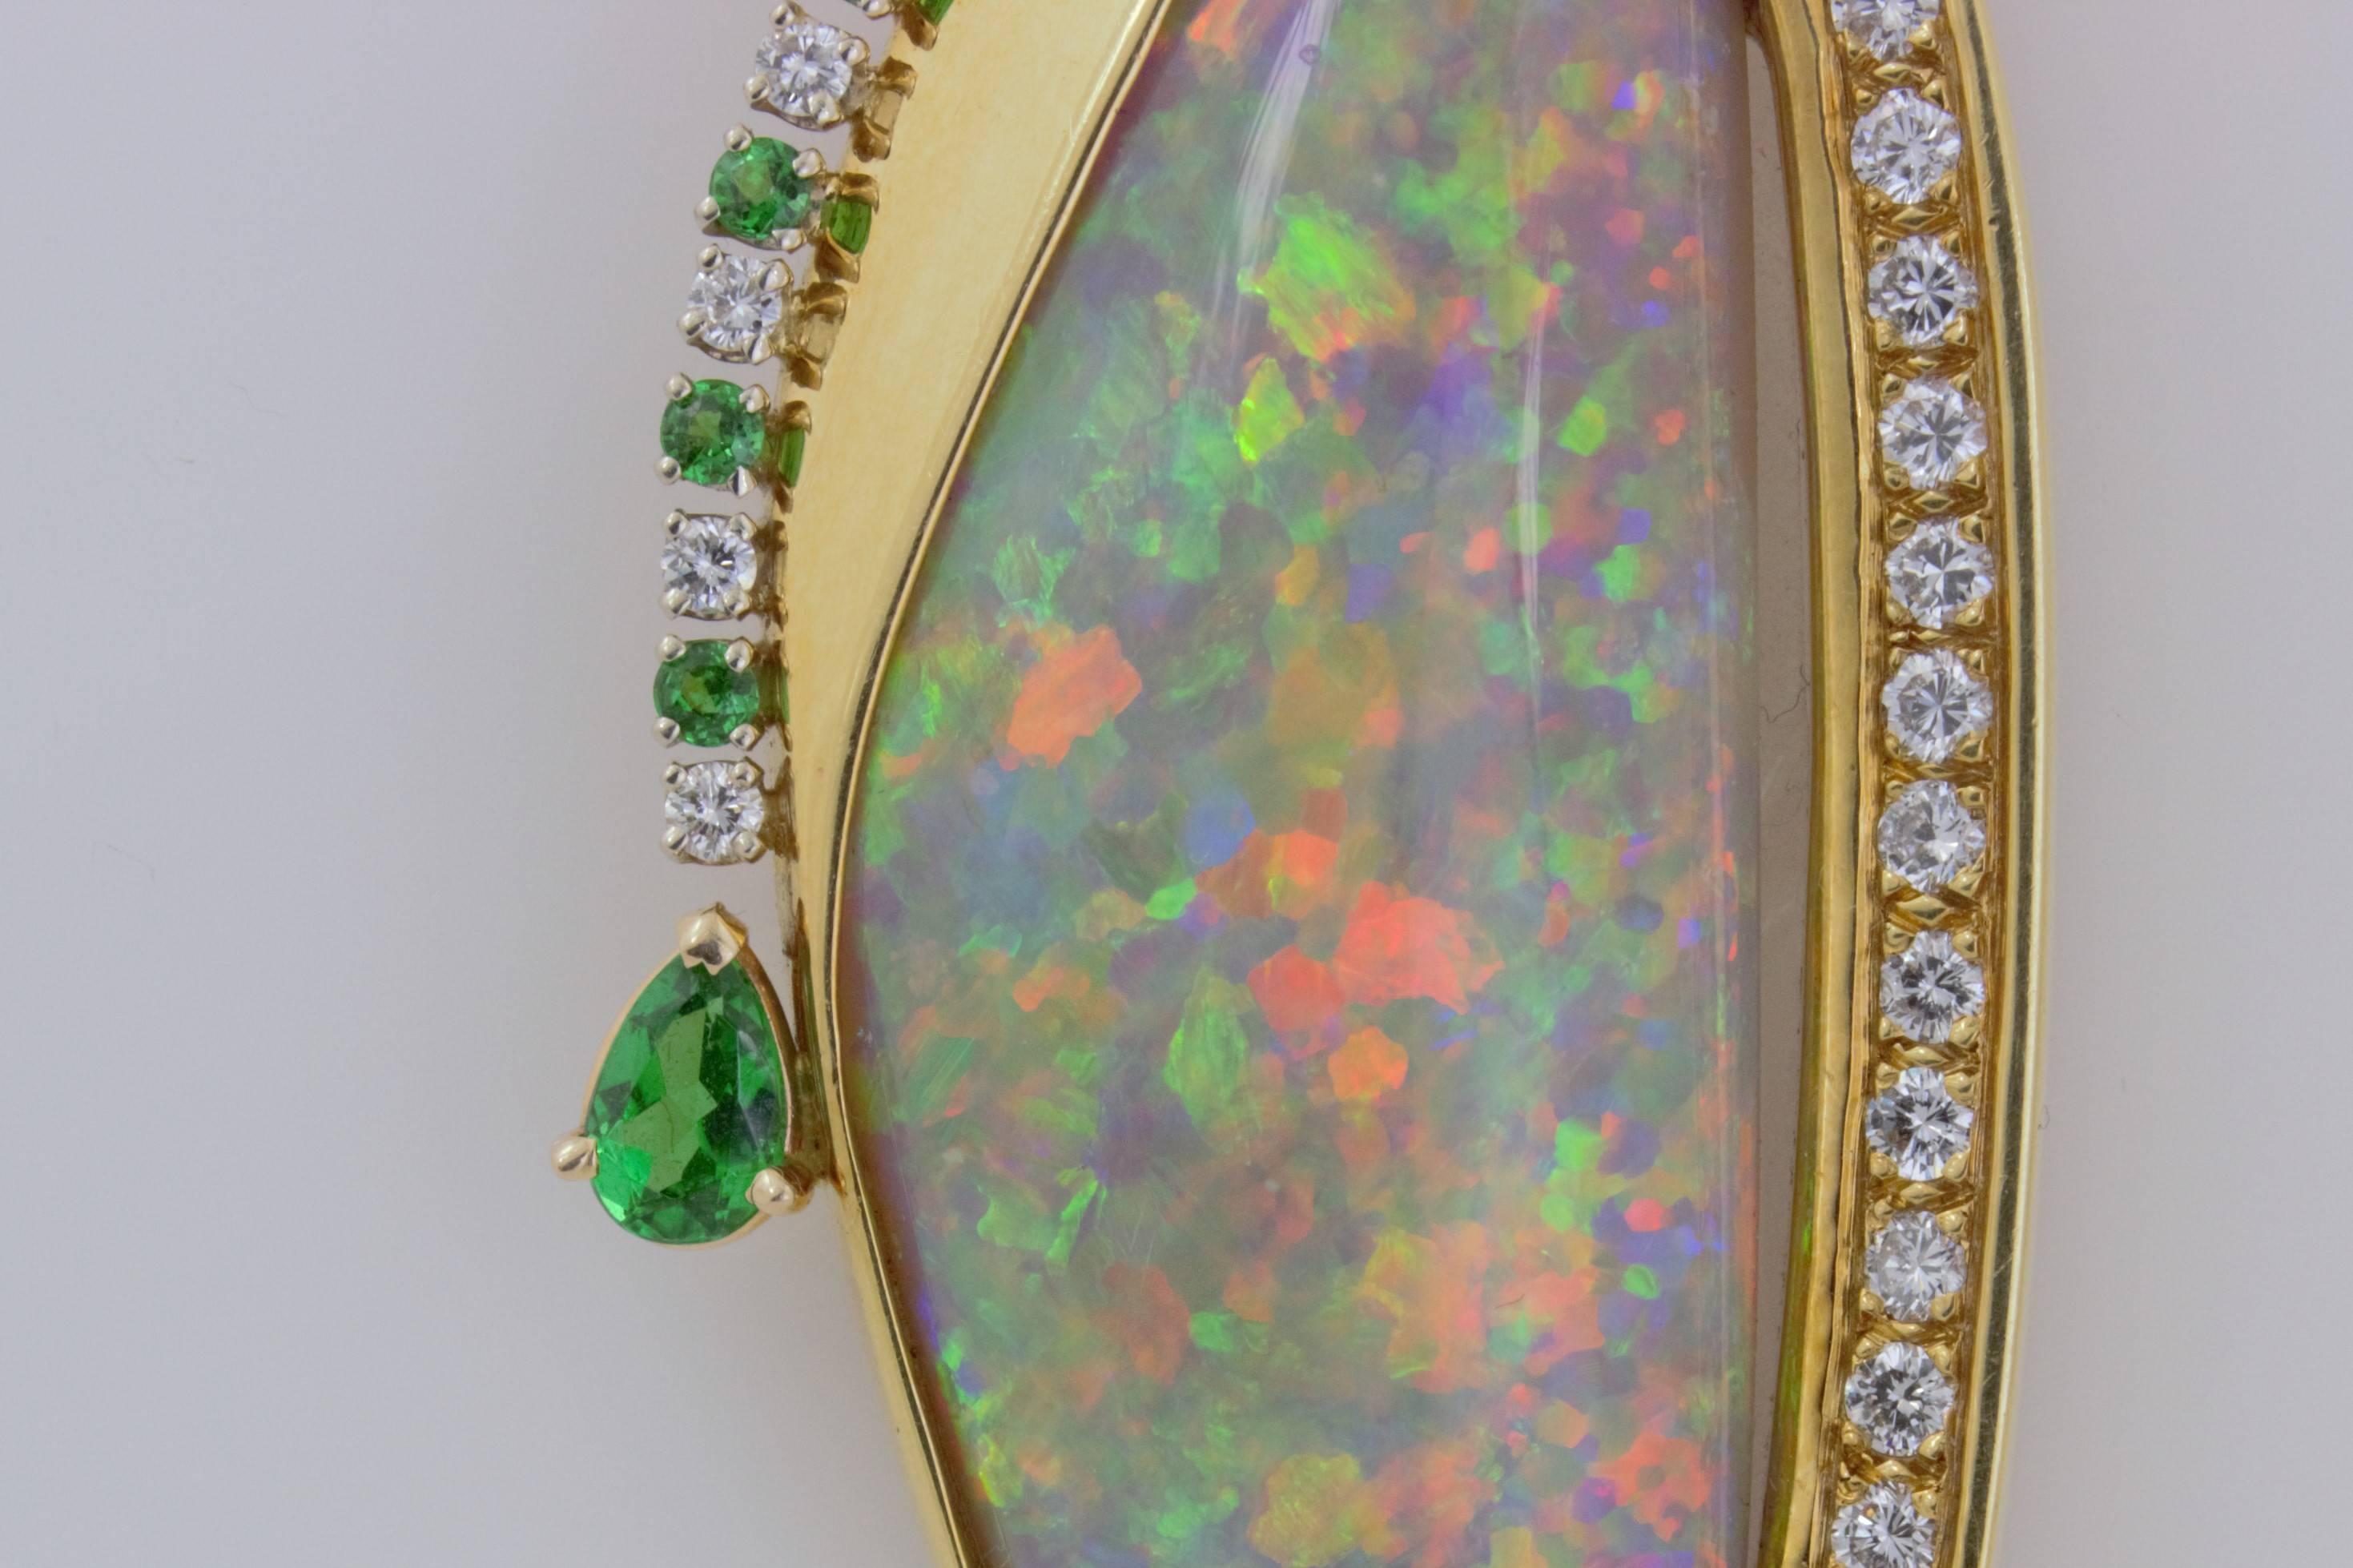 This is a one of a kind 14 karat yellow gold 40 carat, multi color, harlequin pattern, free form custom opal pendant with .71 carats of diamonds, a .48 carat pear shaped Tsavorite garnet,  two pink sapphires totalling .88 carats, and 1/3 carat of